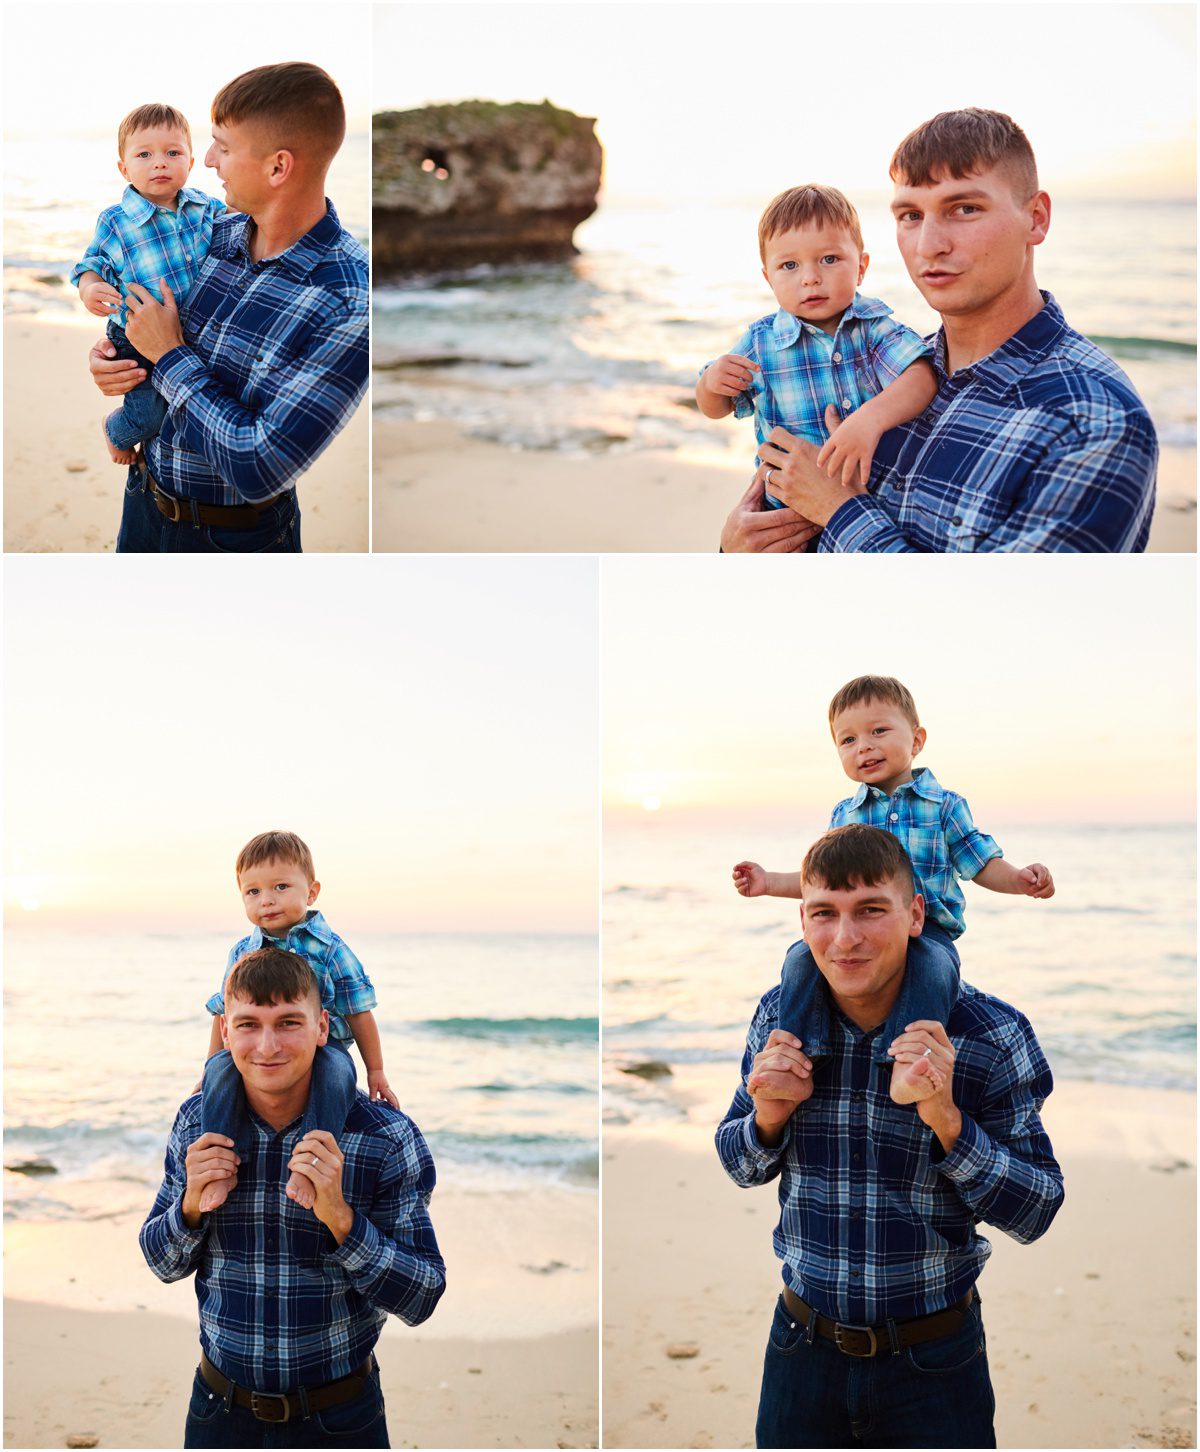 father and son photographs in okinawa